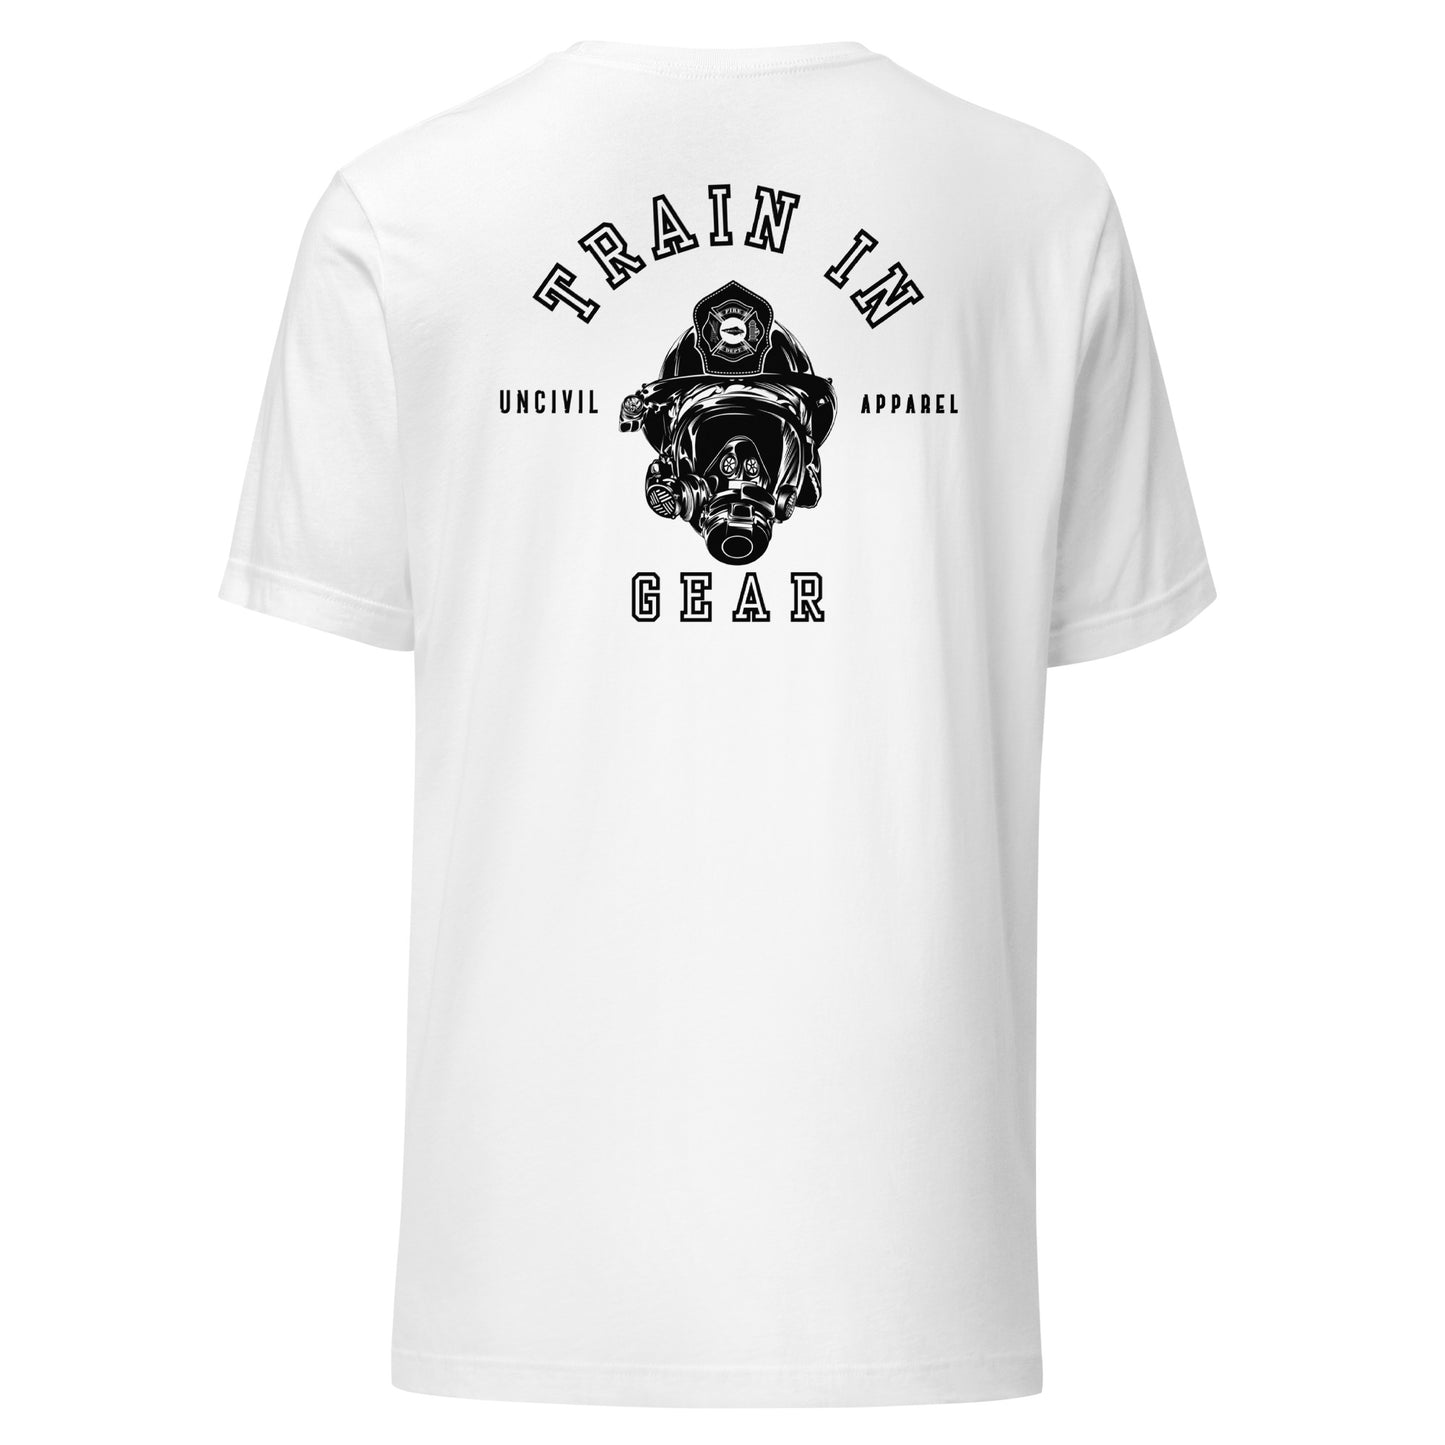 Train in Gear Graphic T-shirt, Firefighter and Military shirts, White.